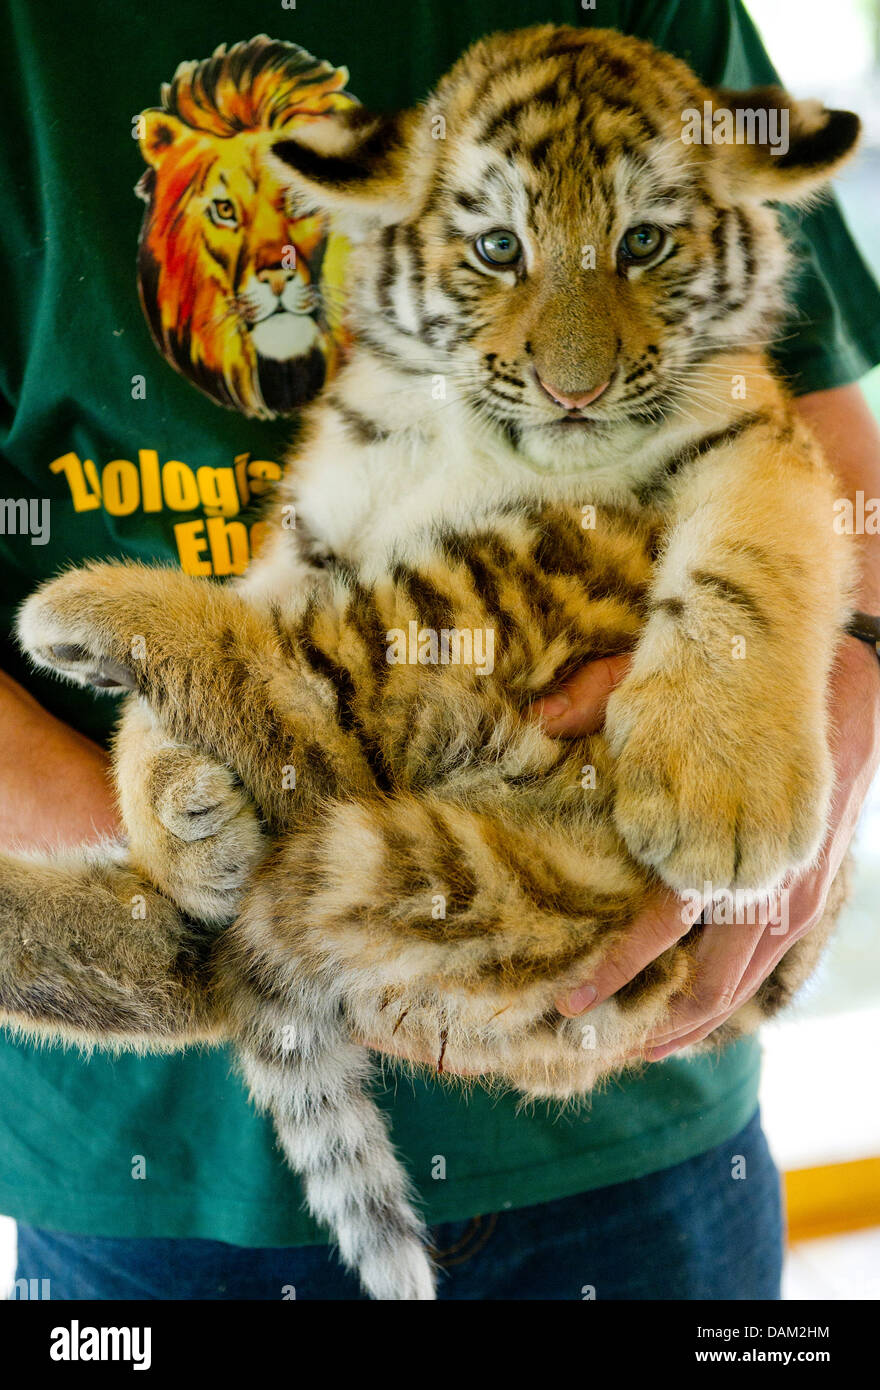 A zookeeper holds a tiger cub that was babtized in the name Josef shortly  before in Eberswalde, Germany, 18 May 2011. The two Siberean tiger cubs  Josef and Victor were born on